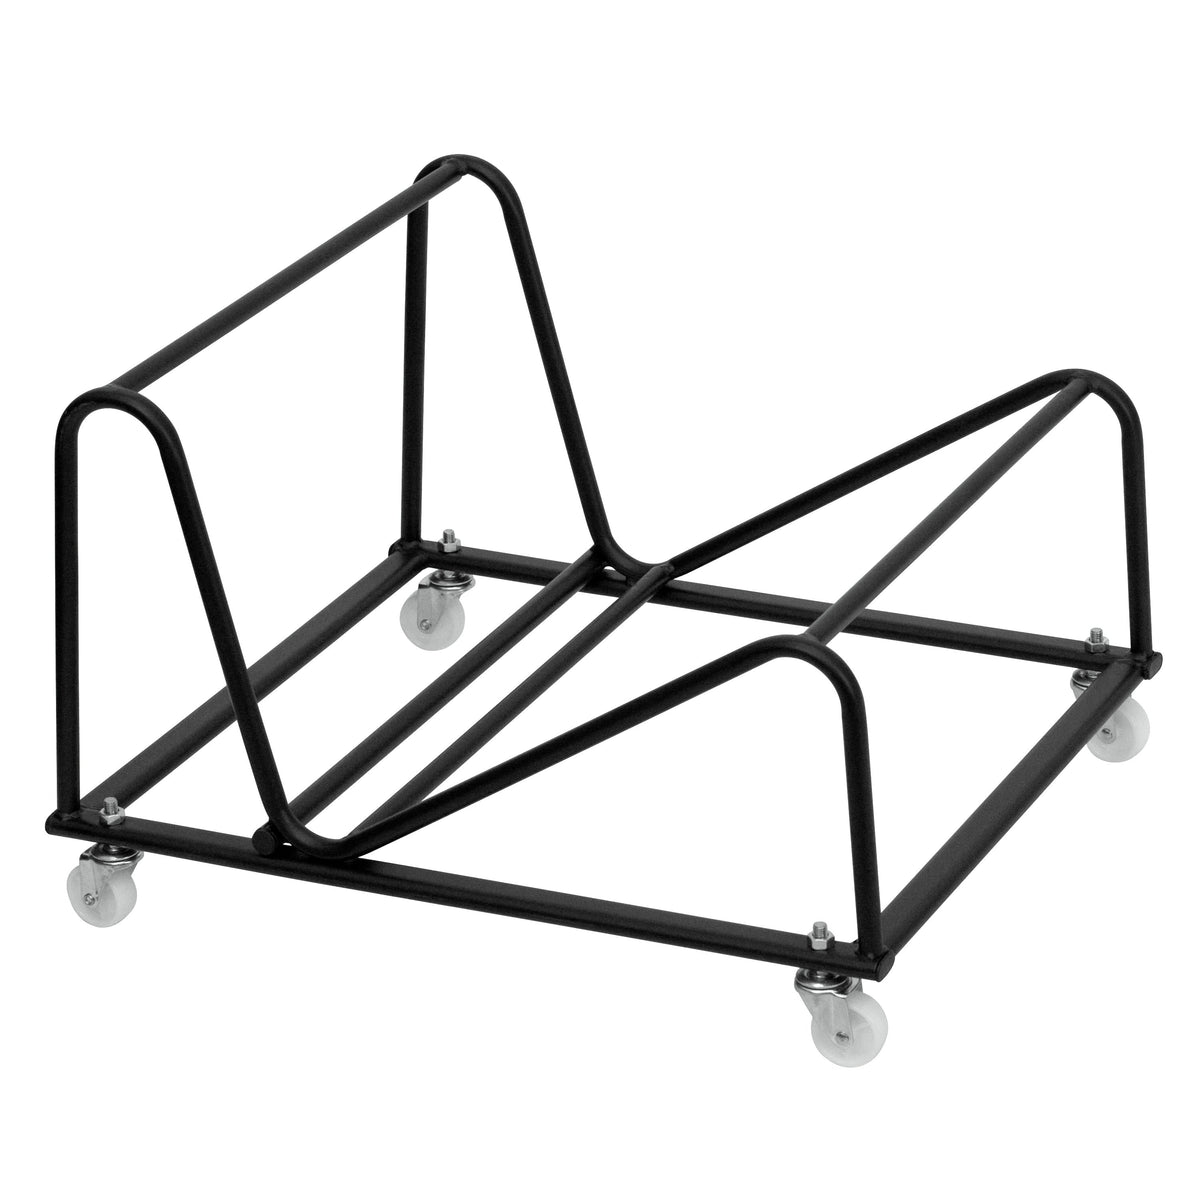 Sled Base Stack Chair Dolly with Black Steel Frame - Maintenance Truck